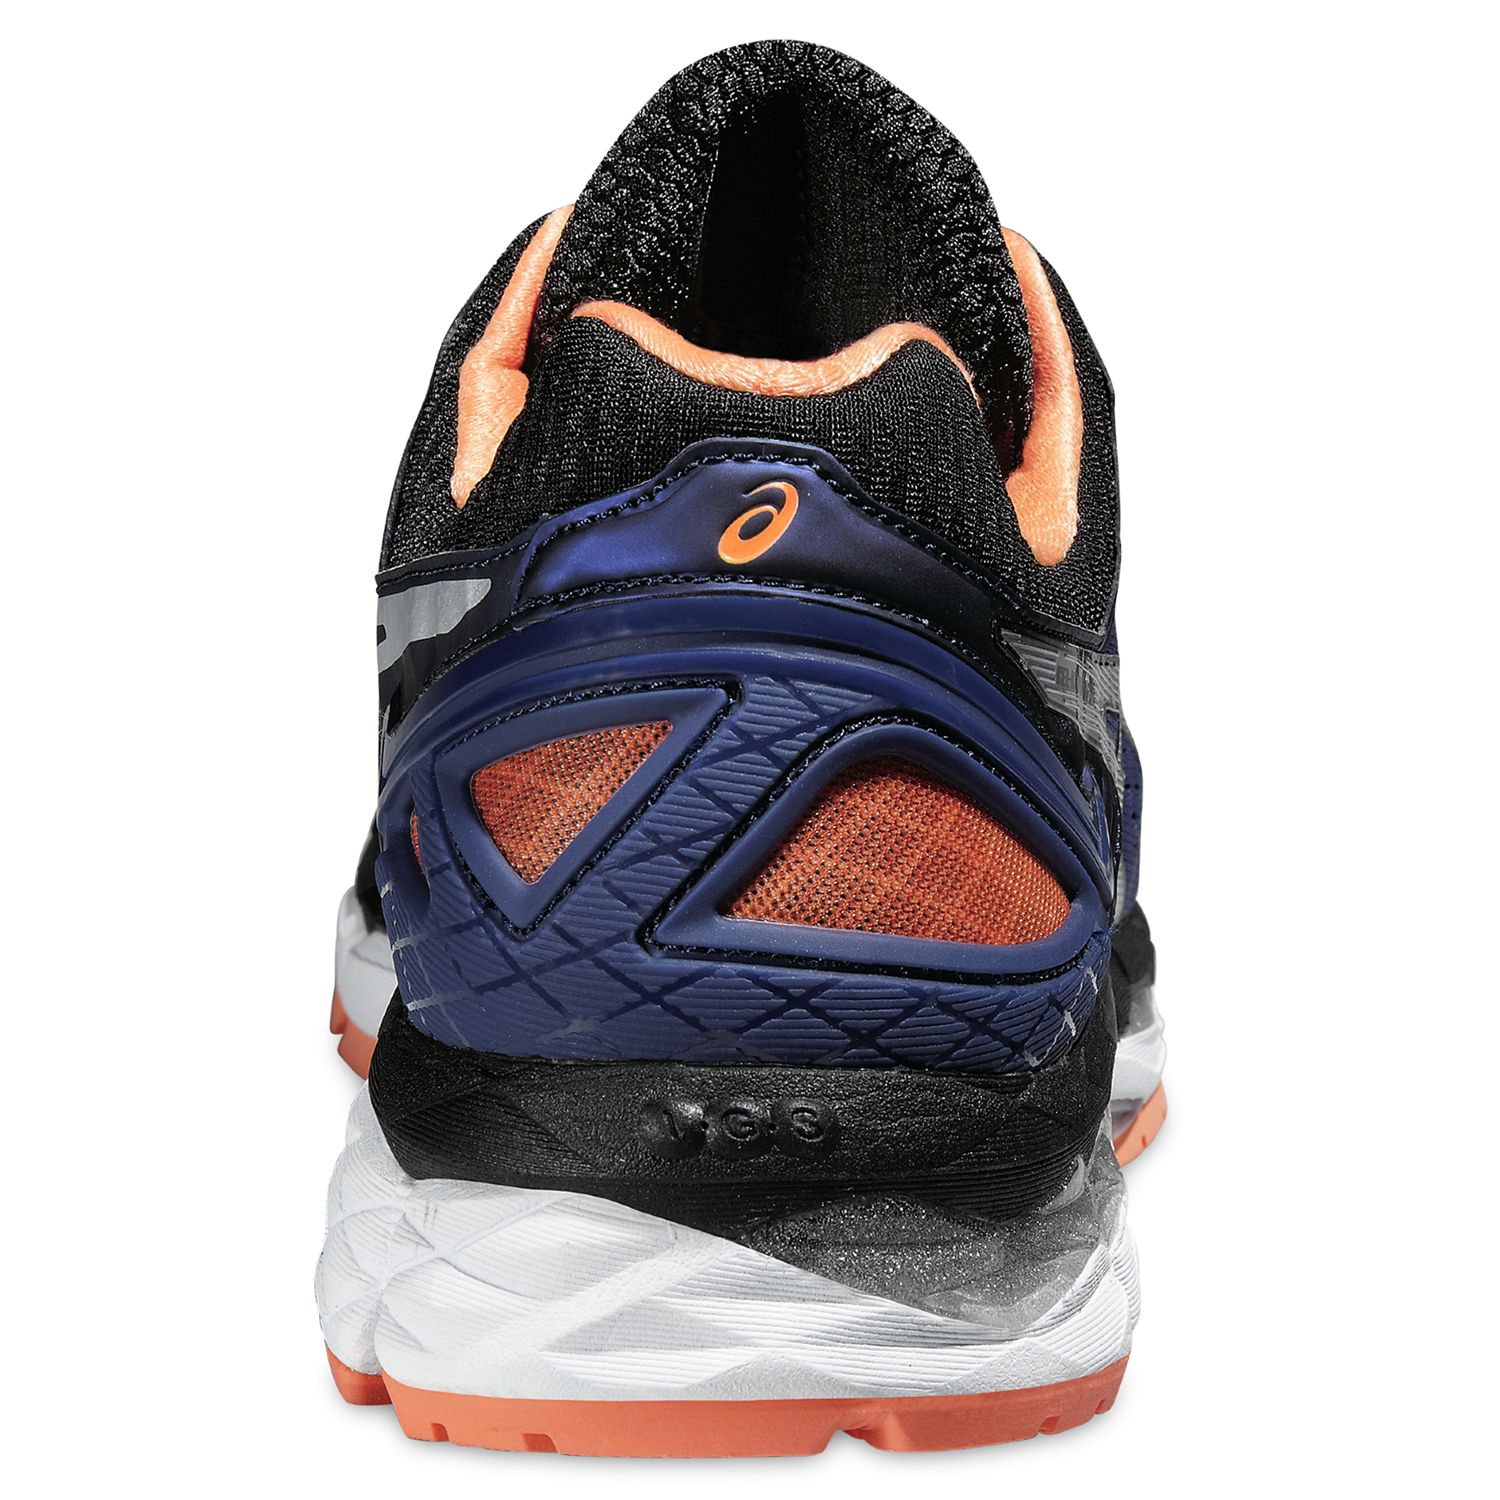 asics structured trainers